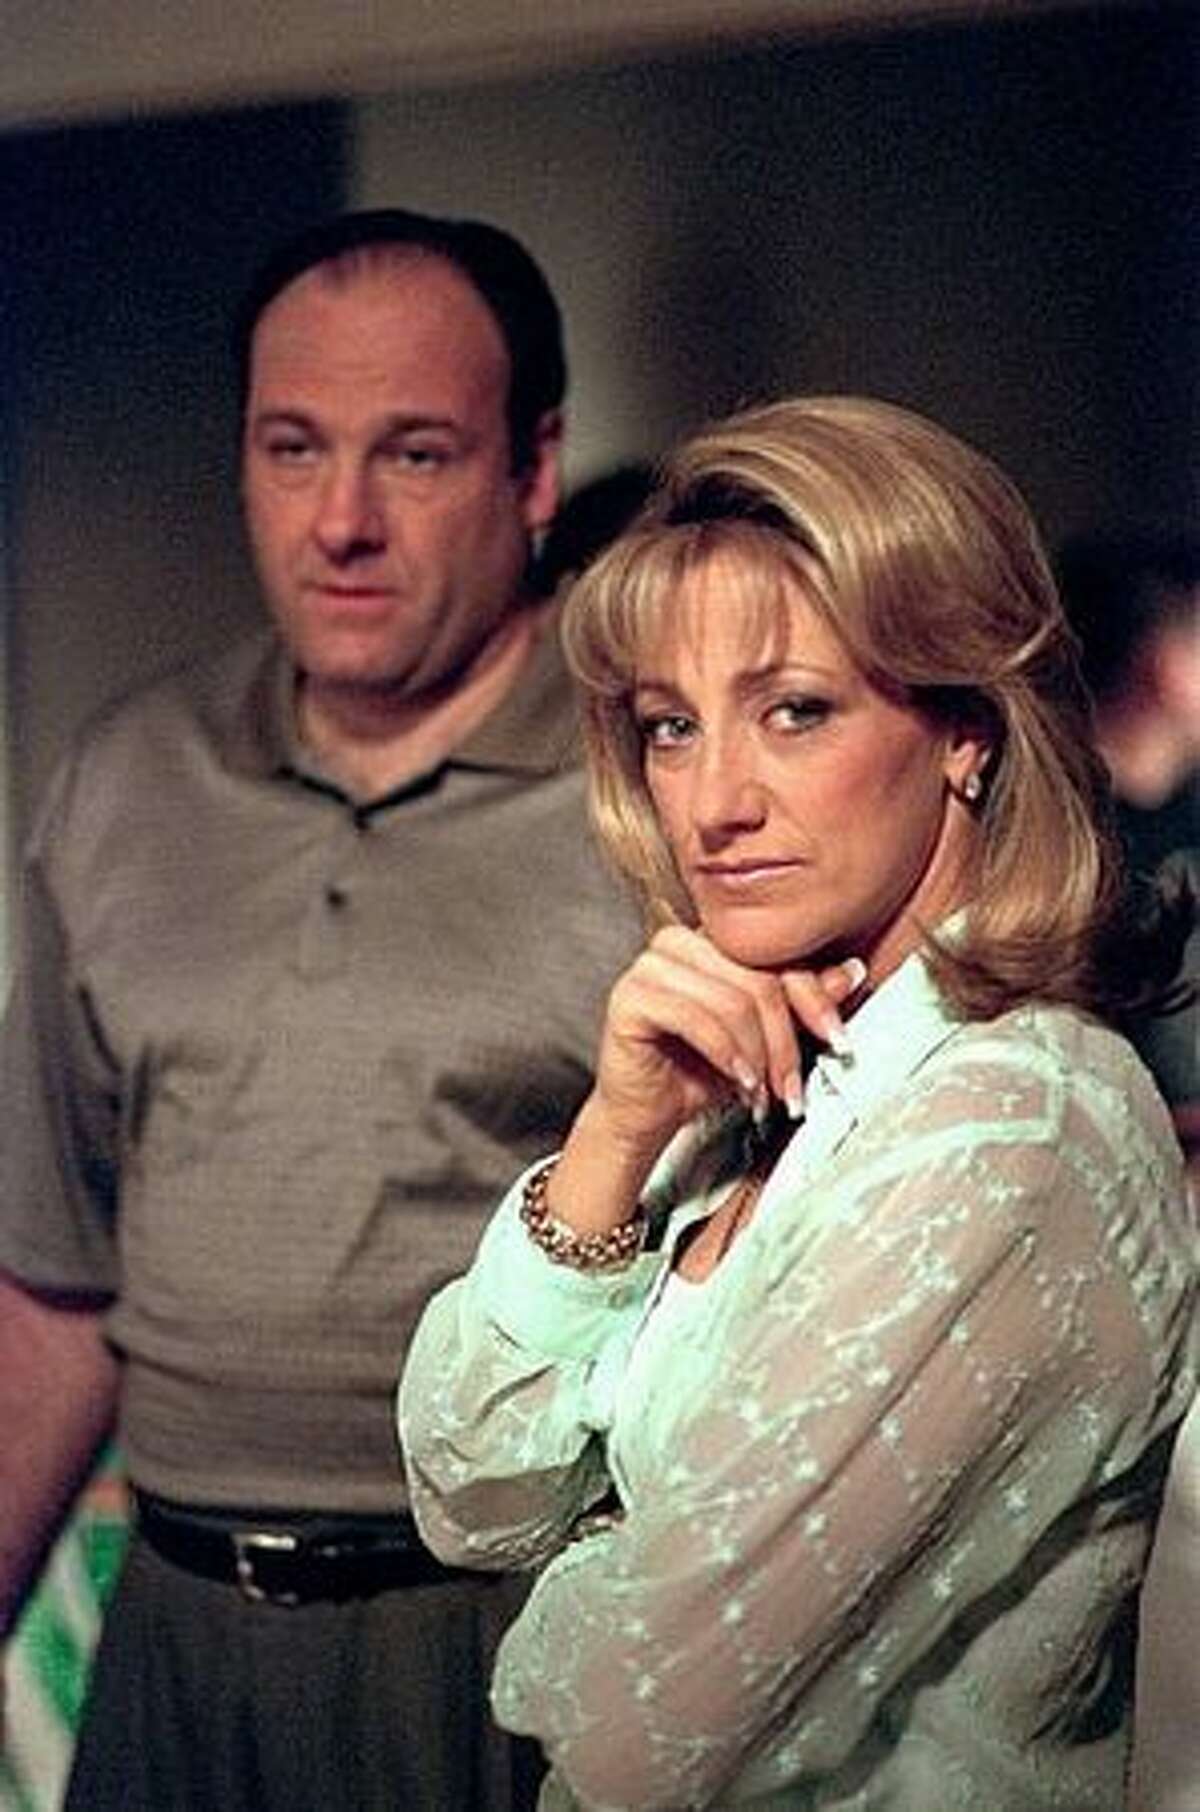 James Gandolfini and Edie Falco of the HBO drama series "The Sopranos," a key example of cable's creative dominance.